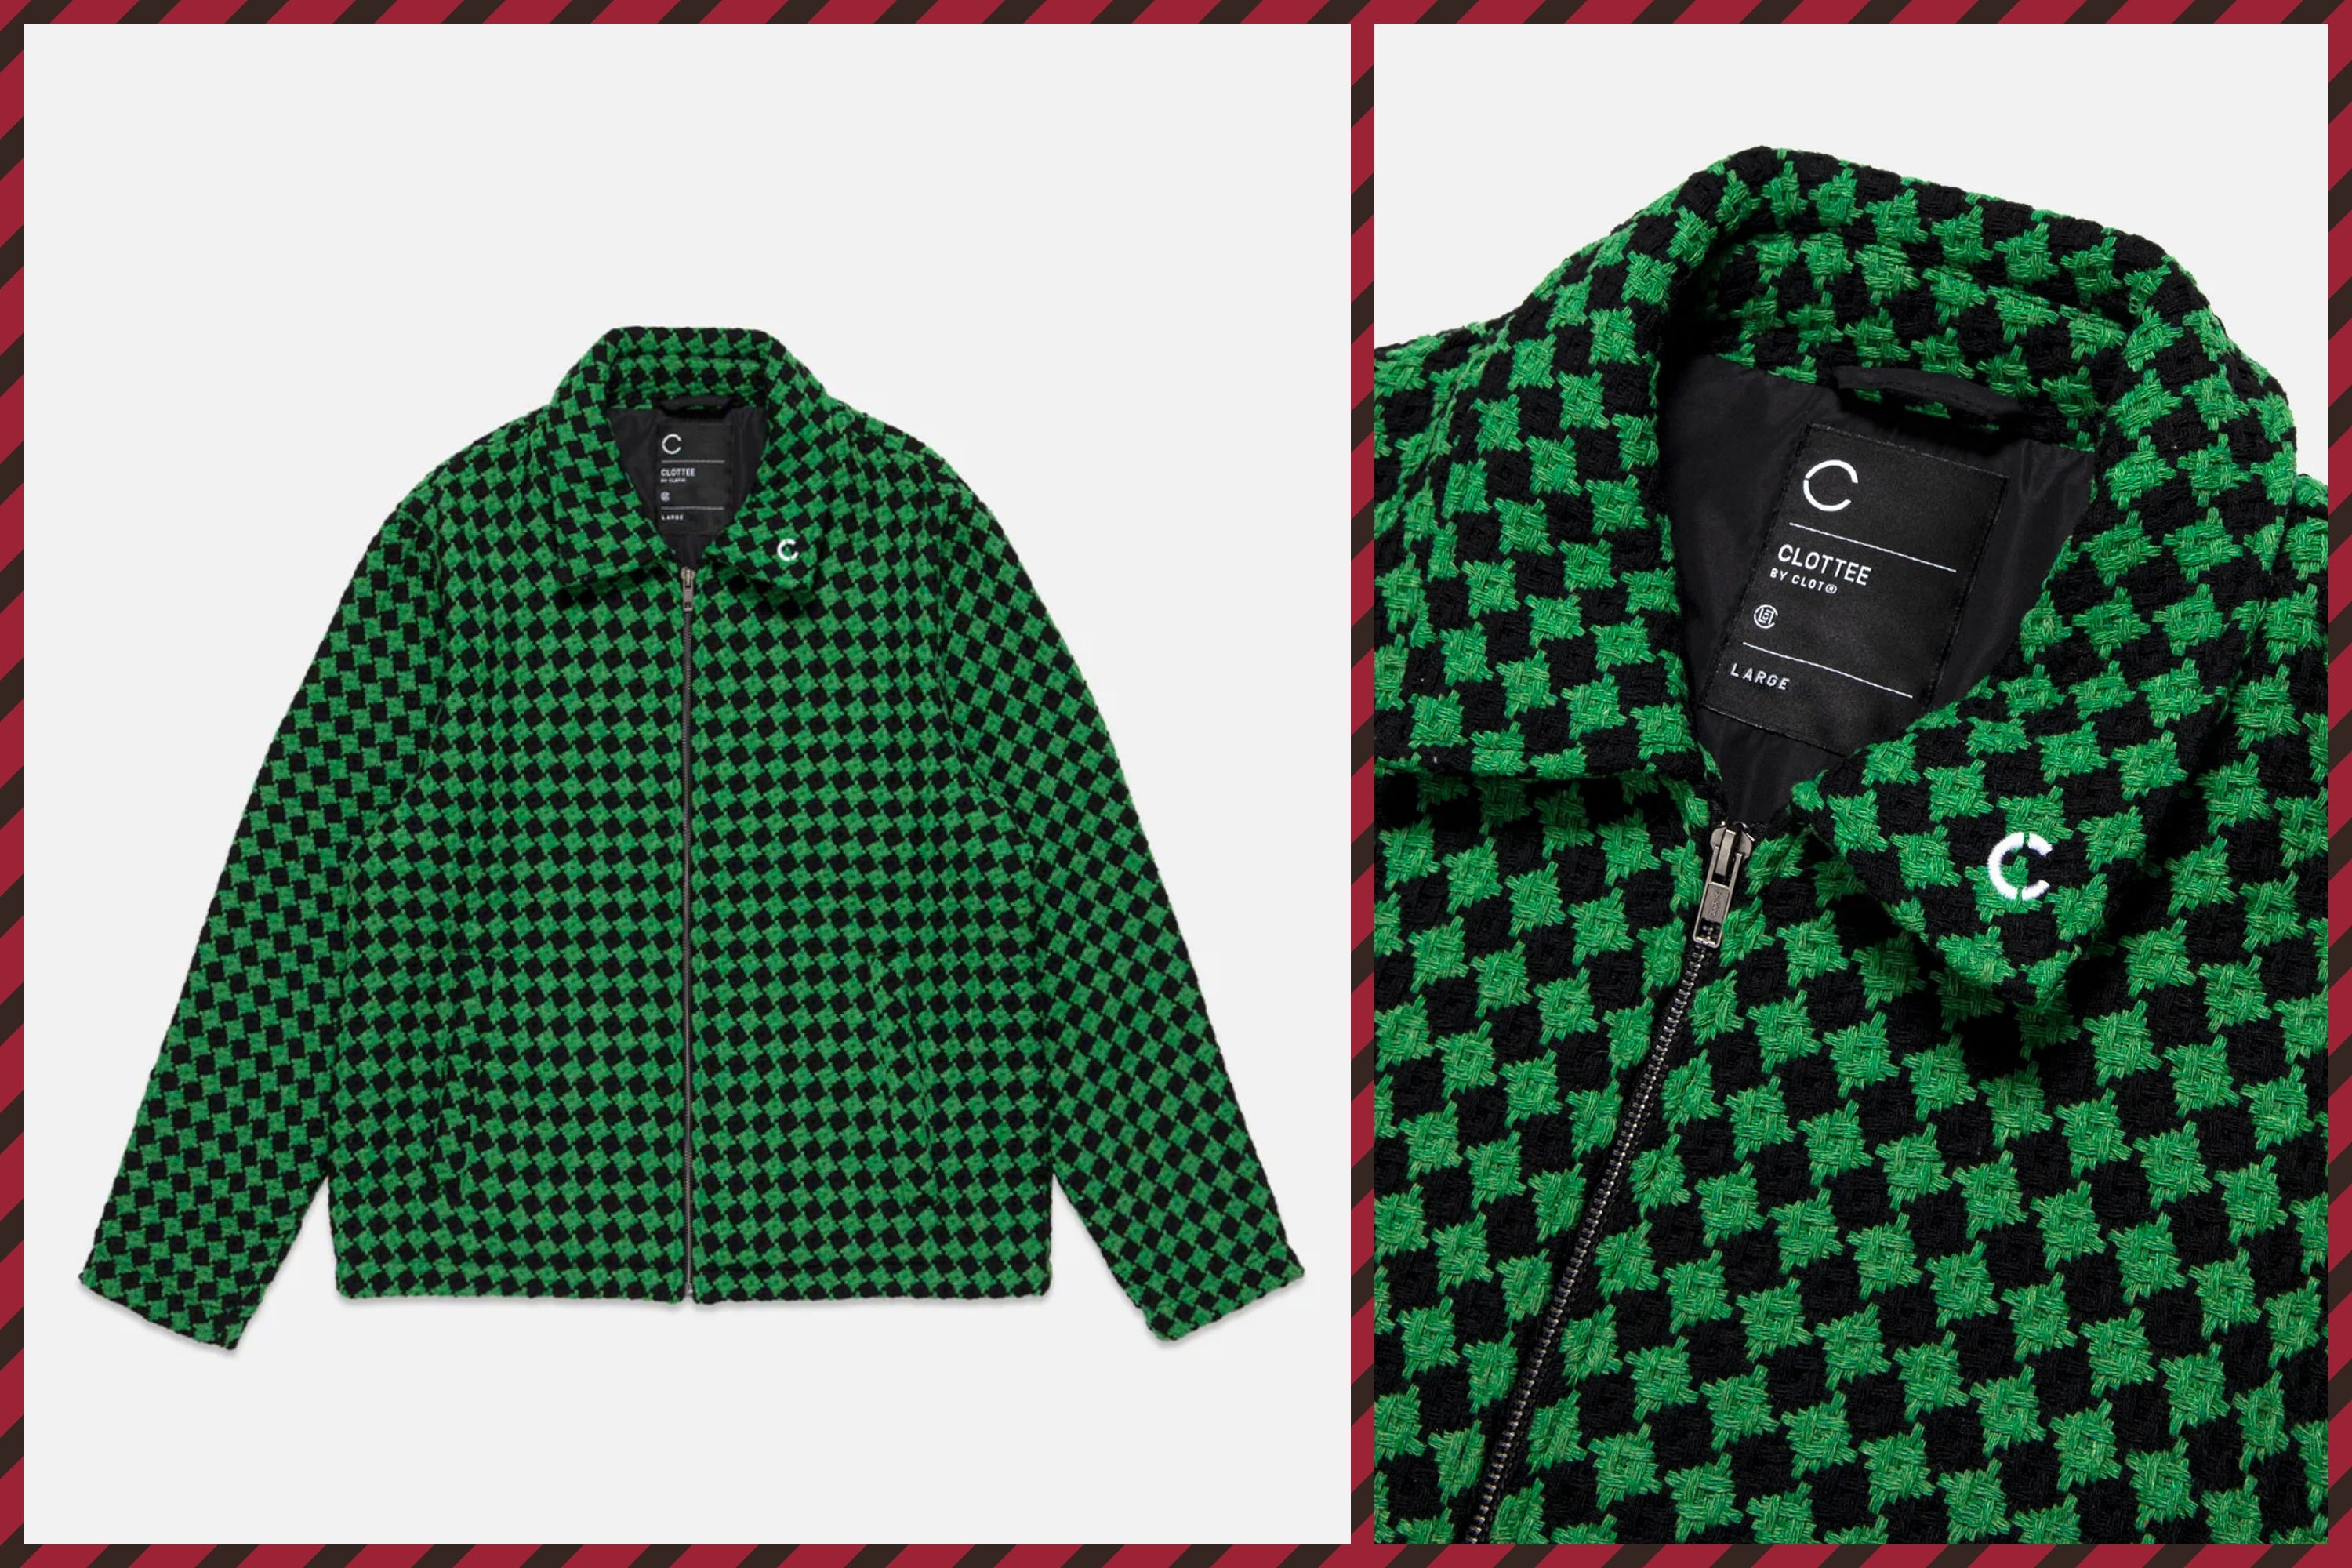 JUICE Holiday Gift Guide - CLOTTEE Houndstooth Jacket